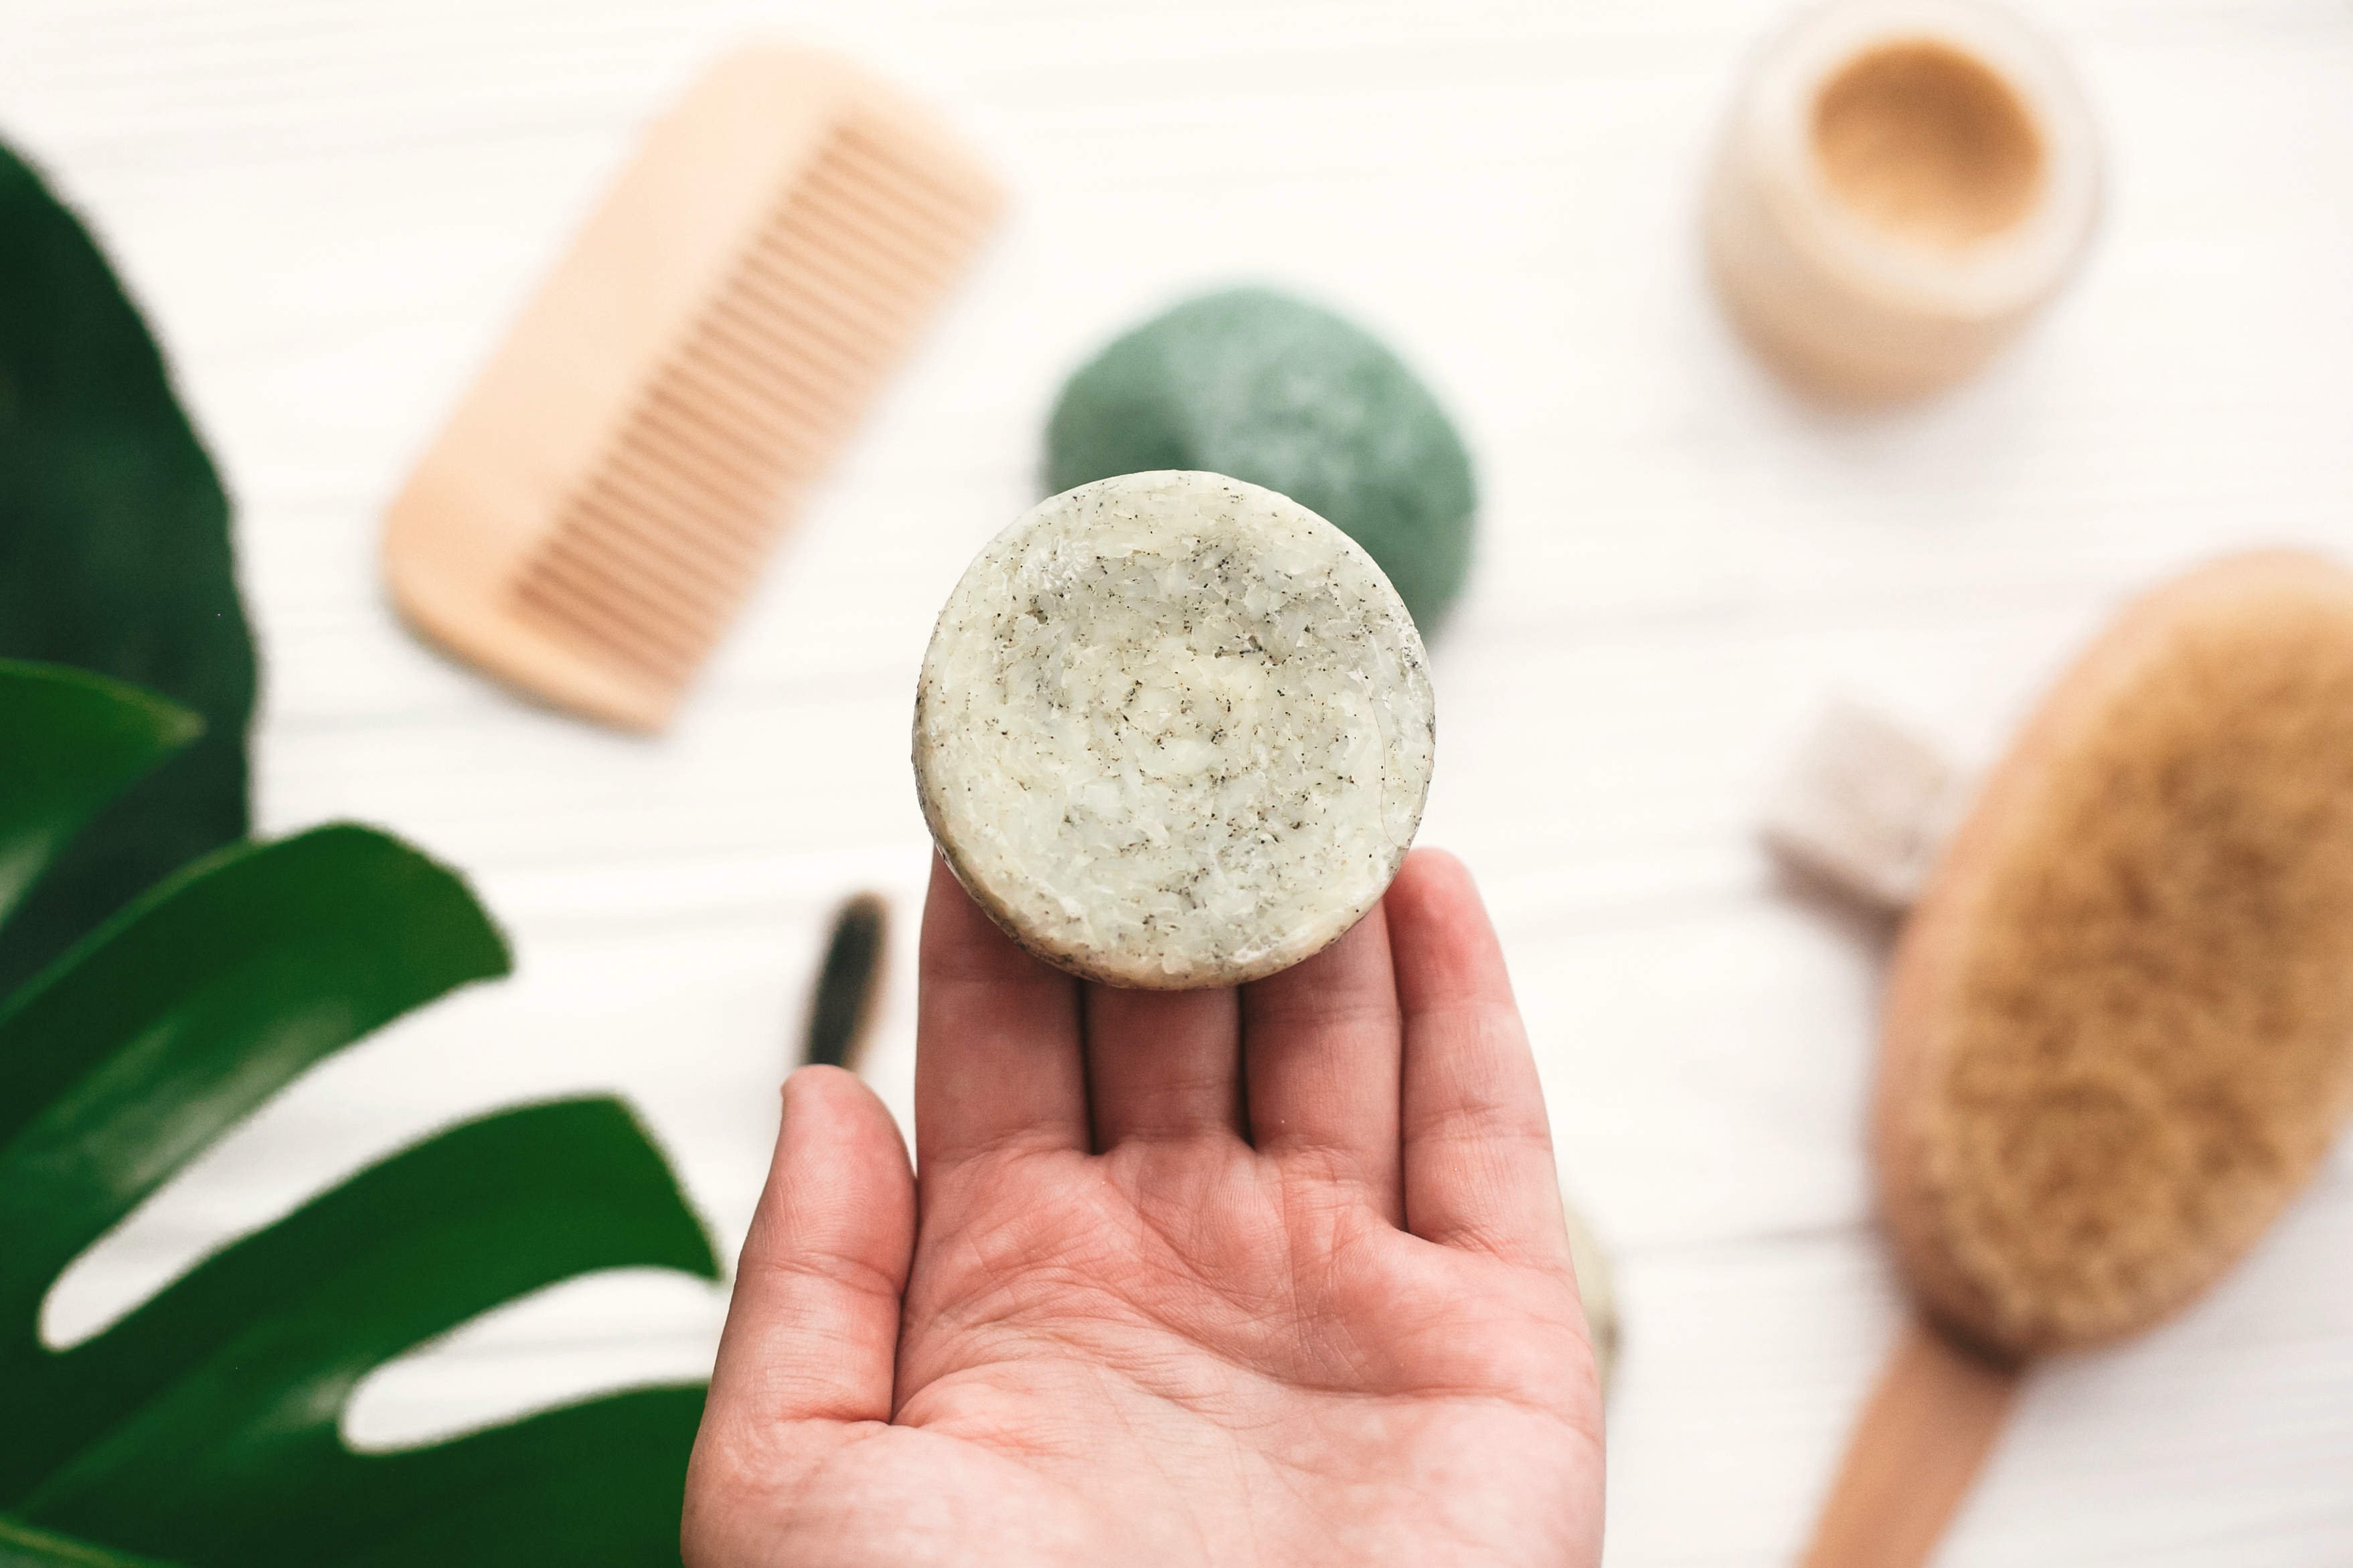 Hand holding natural solid shampoo bar on background of bamboo brush, deodorant, sponge on white wood with green monstera leaves. Zero waste. Choice plastic free eco products